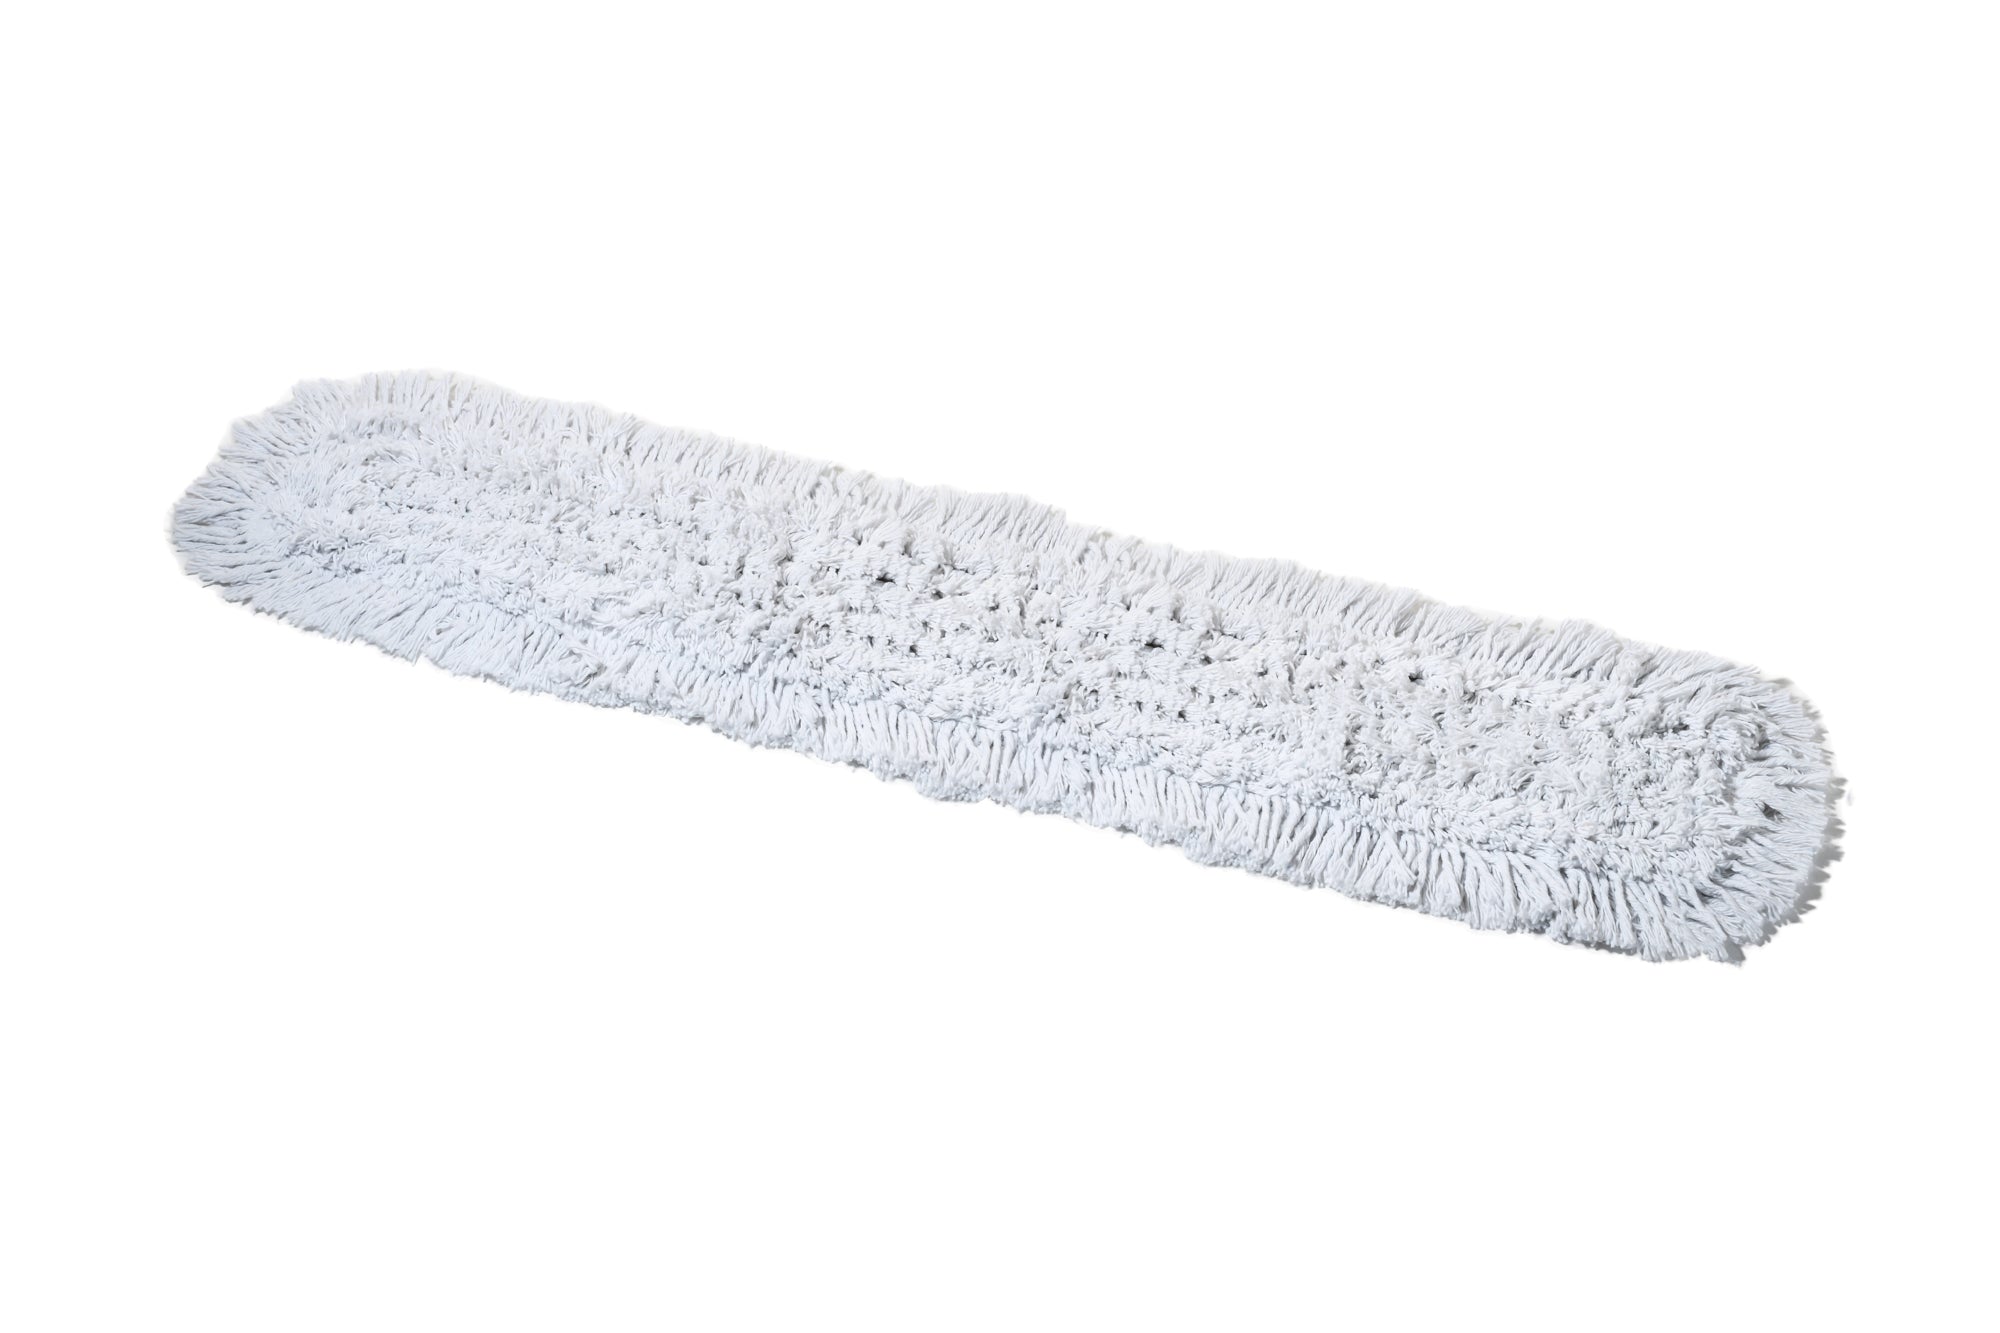 Tidy Tools 60 Inch Cotton Dust Mop Refill